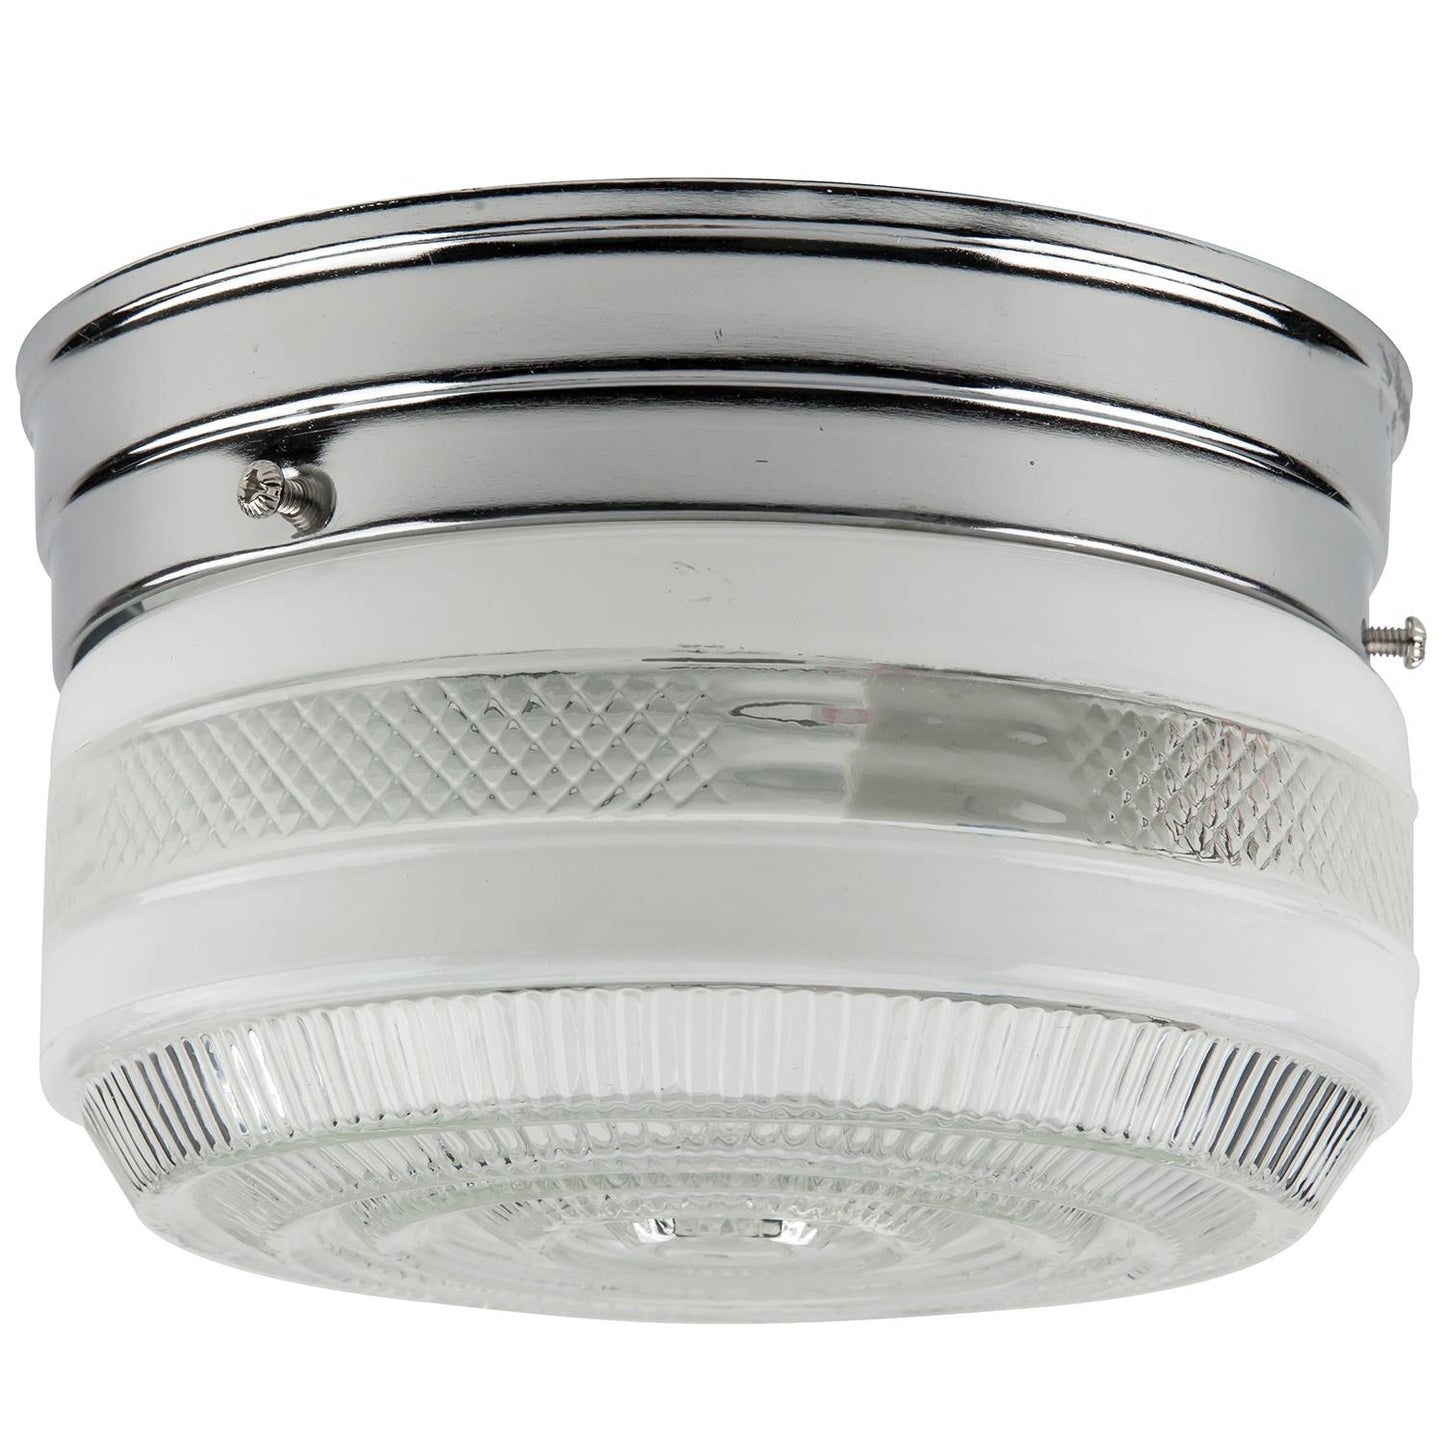 Sunlite 6" Drum Ceiling Fixture, Chrome Finish, Semi-Frosted Glass